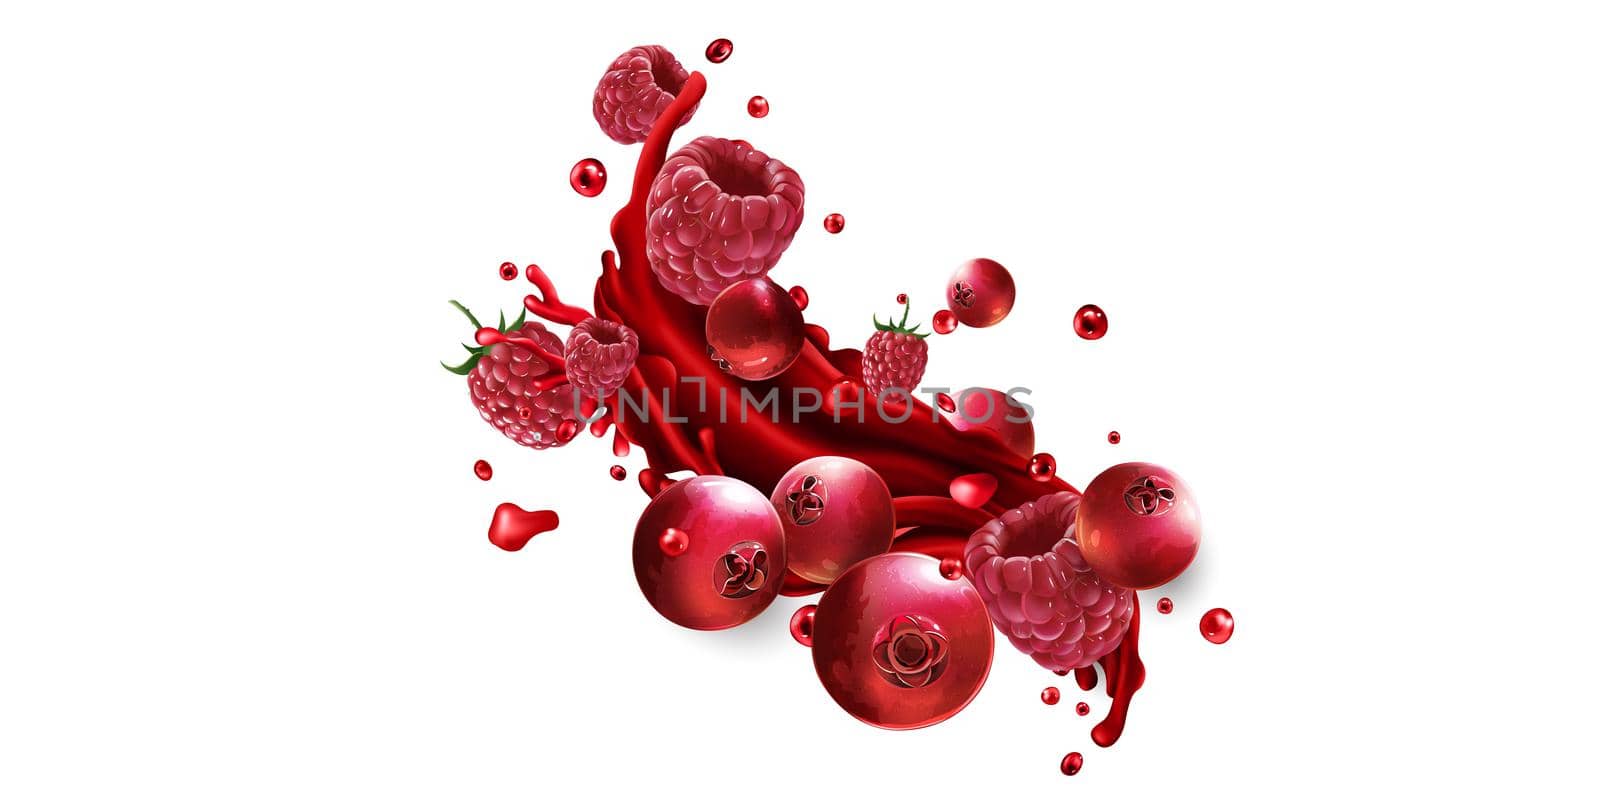 Cranberries and raspberries and a splash of red fruit juice on a white background. Realistic style illustration.